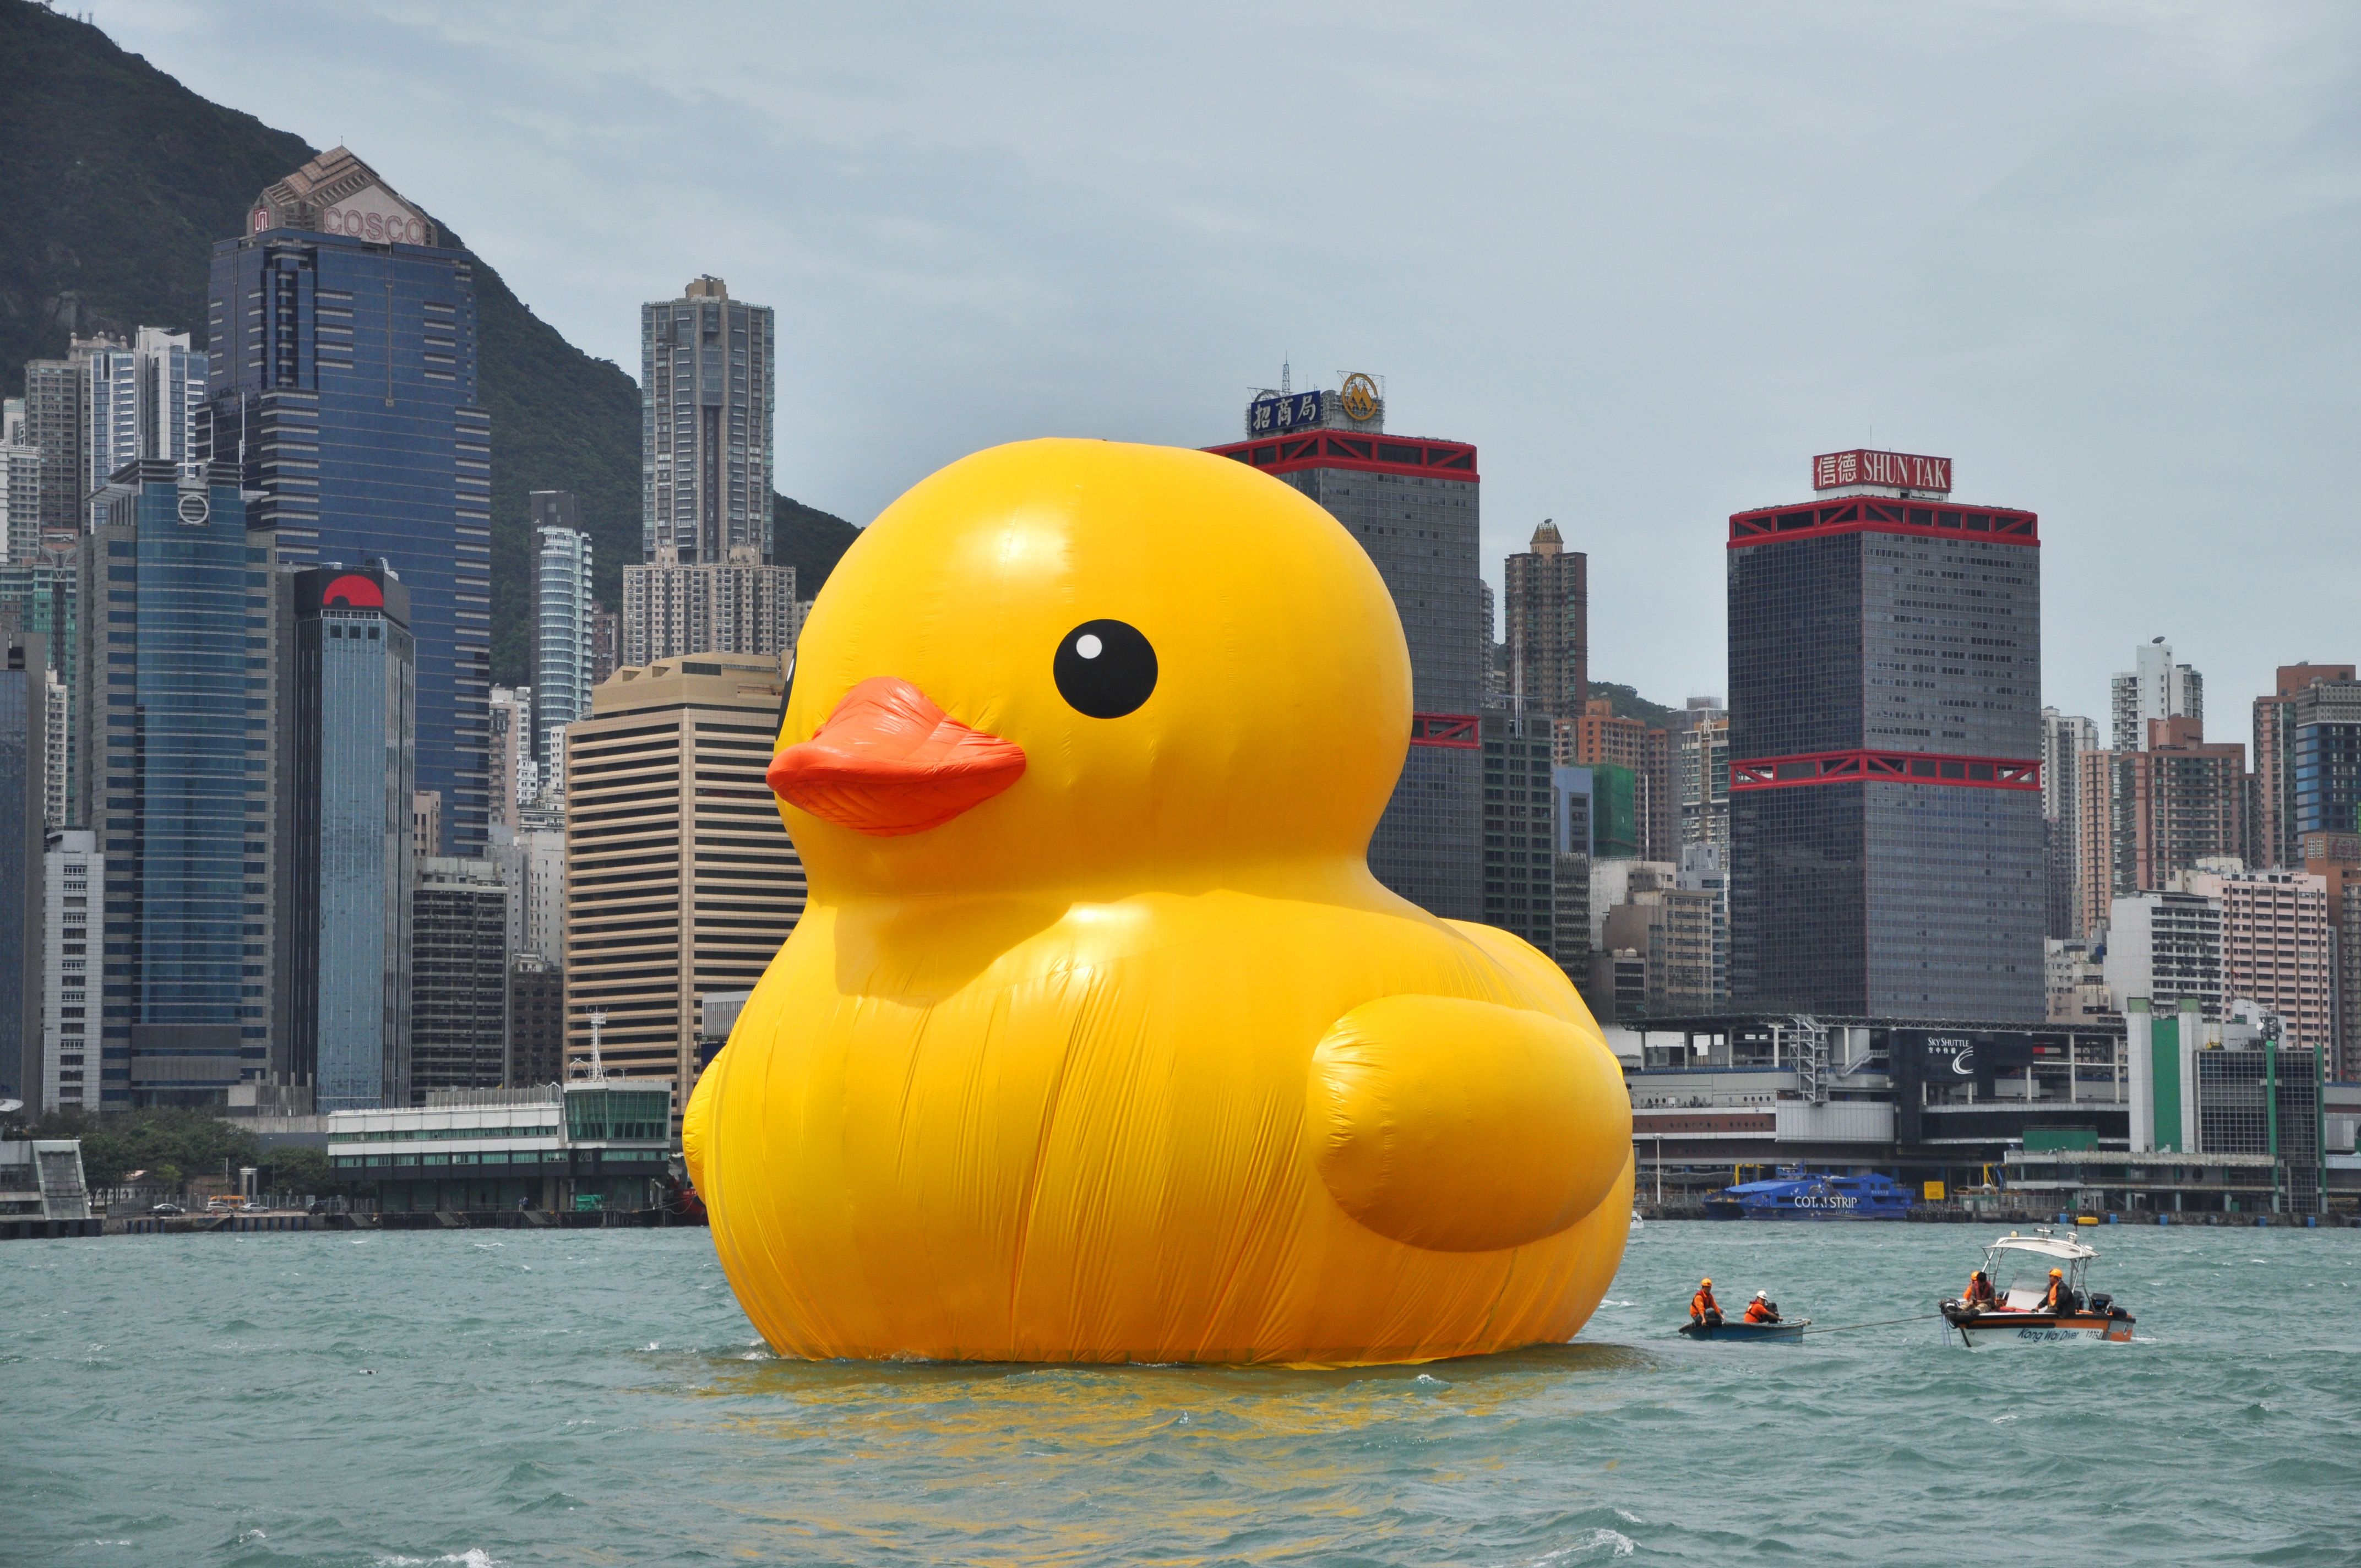 Hong Kong giant inflatable rubber duck